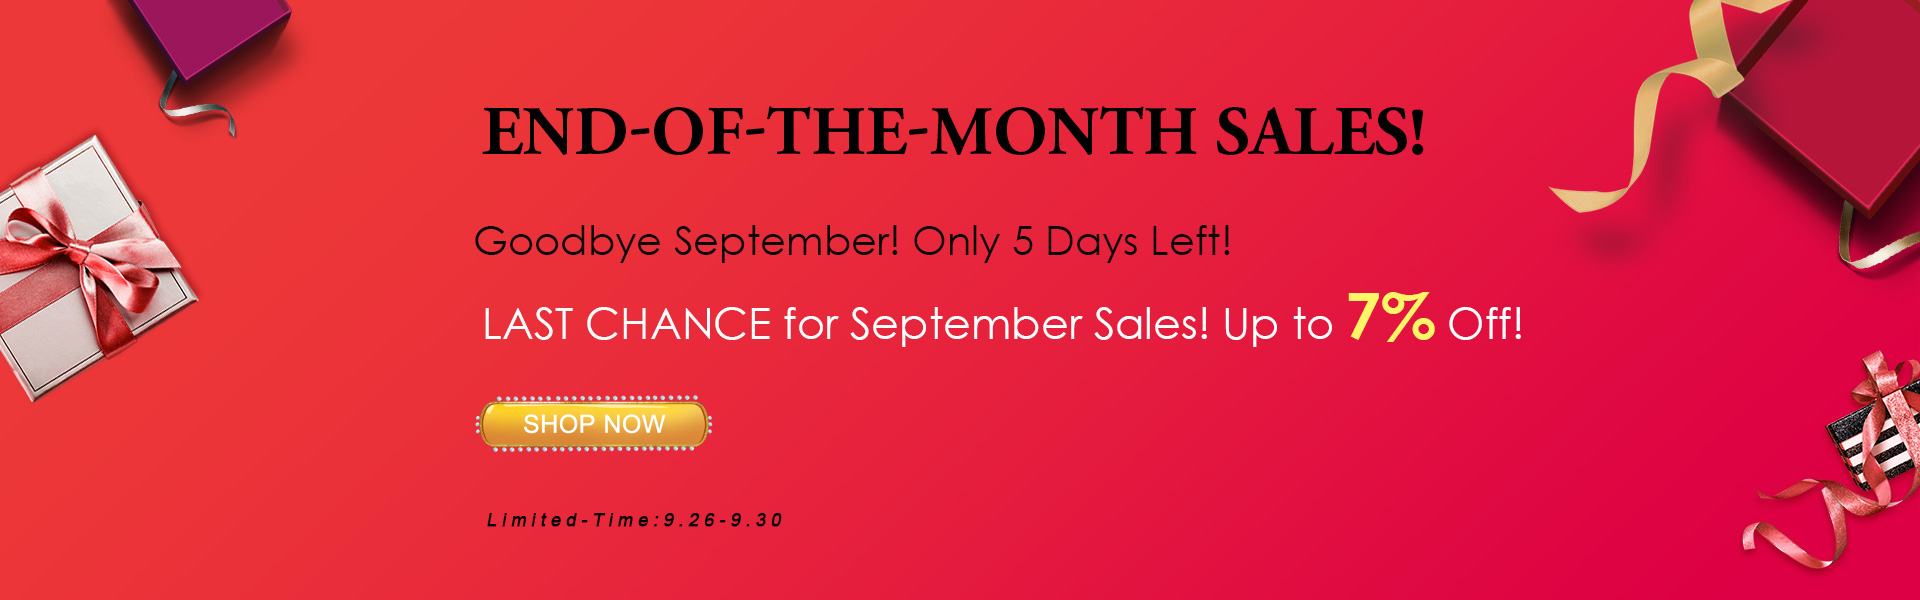 End-of-the-Month Sales!